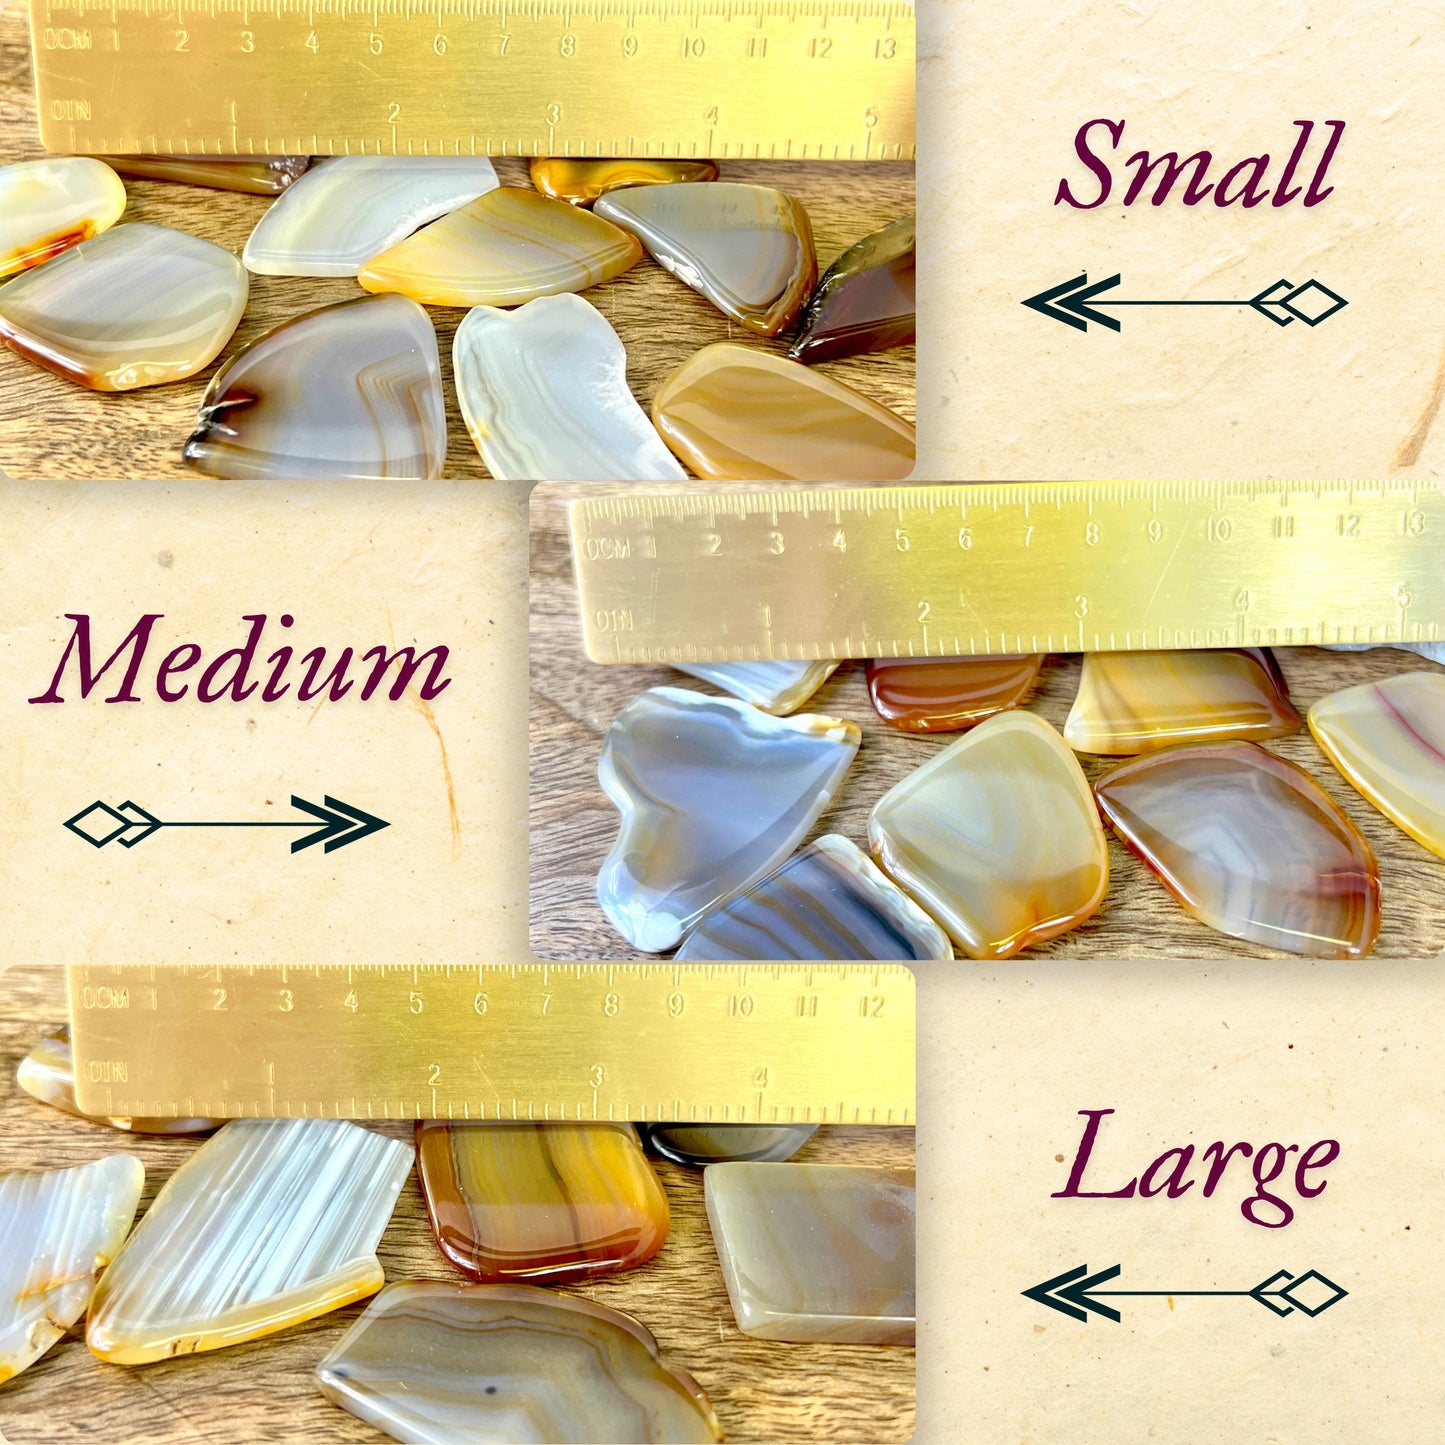 A collage showing small, medium, and large polished Agate slices next to a ruler. They are natural crystals.